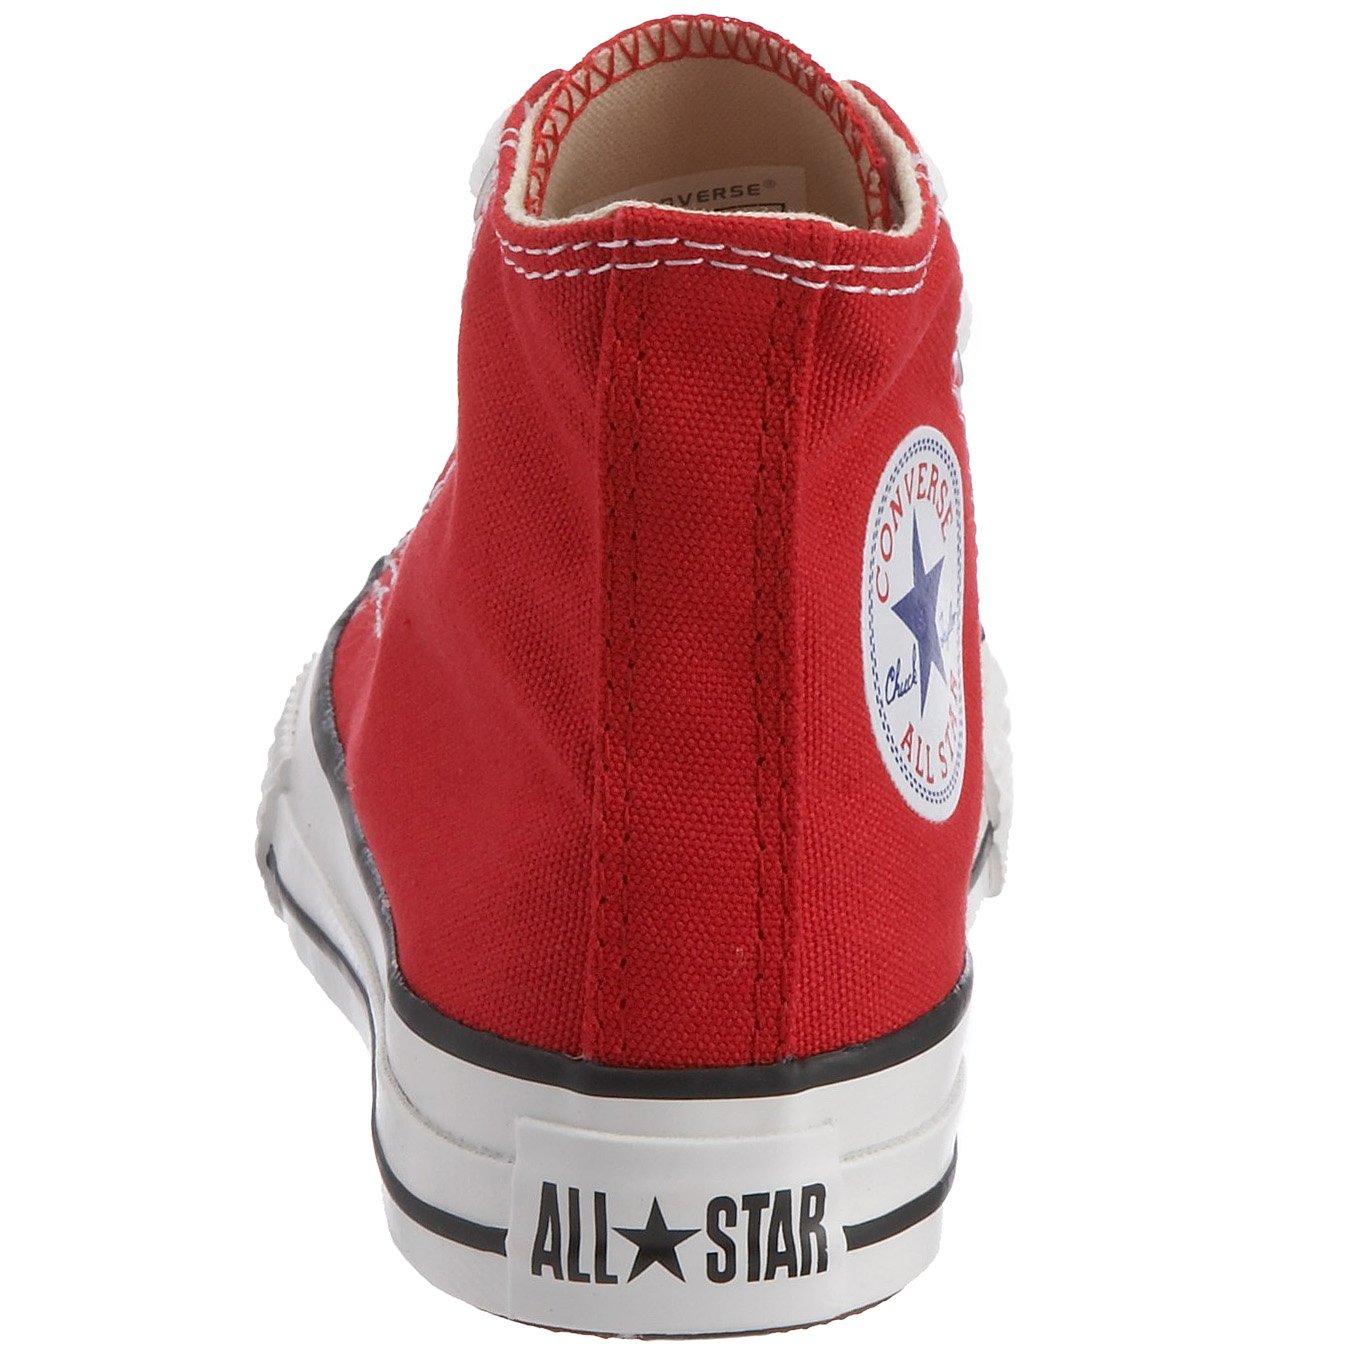 Children's Converse Chuck Taylor All Star High Top Sneaker - image 3 of 11